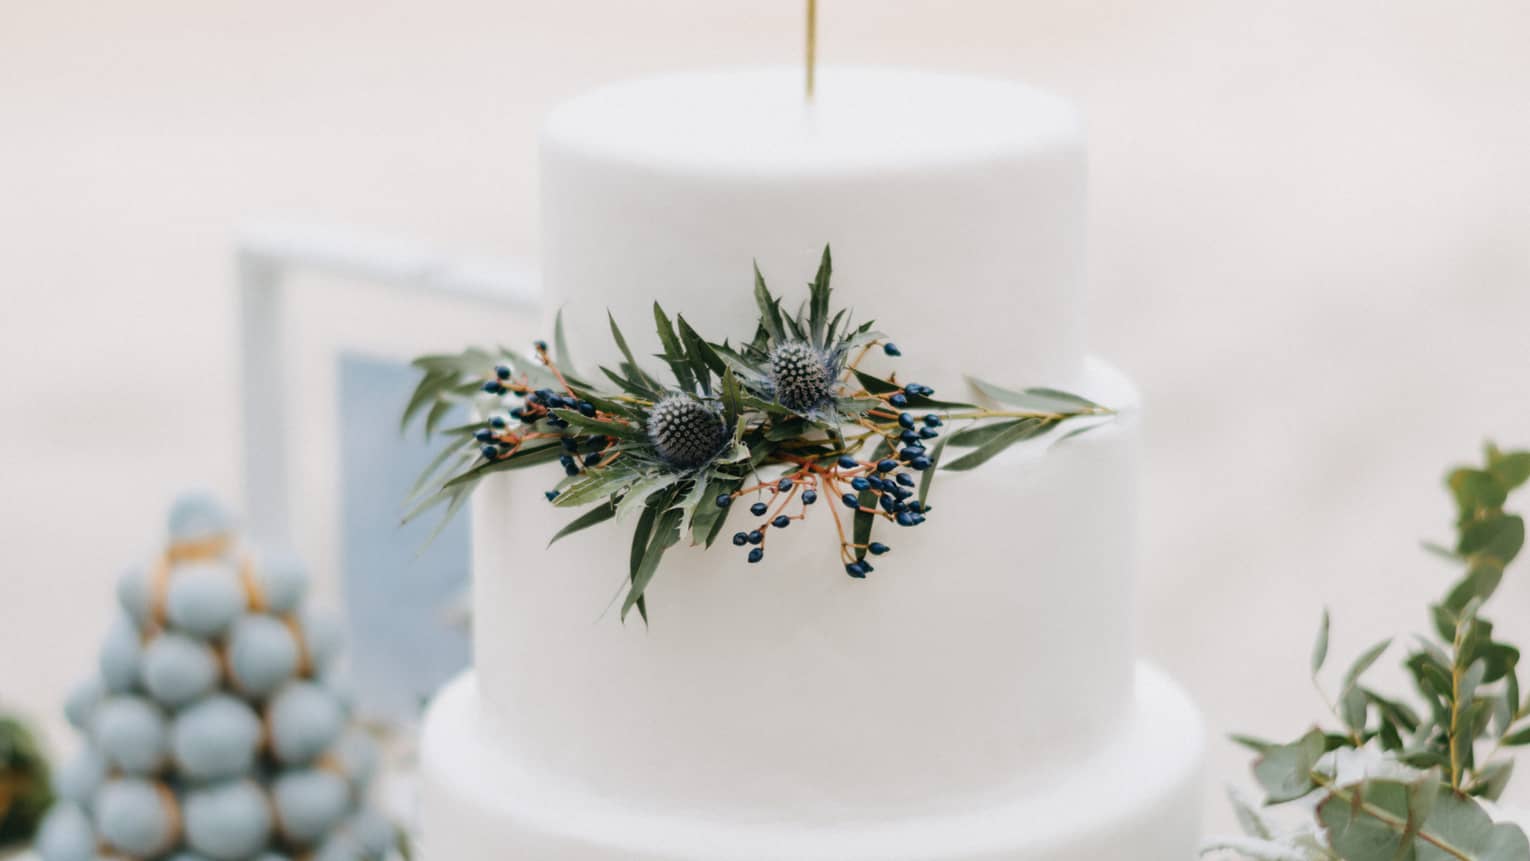 Three tiered wedding cake decorated with green leaves, white flowers